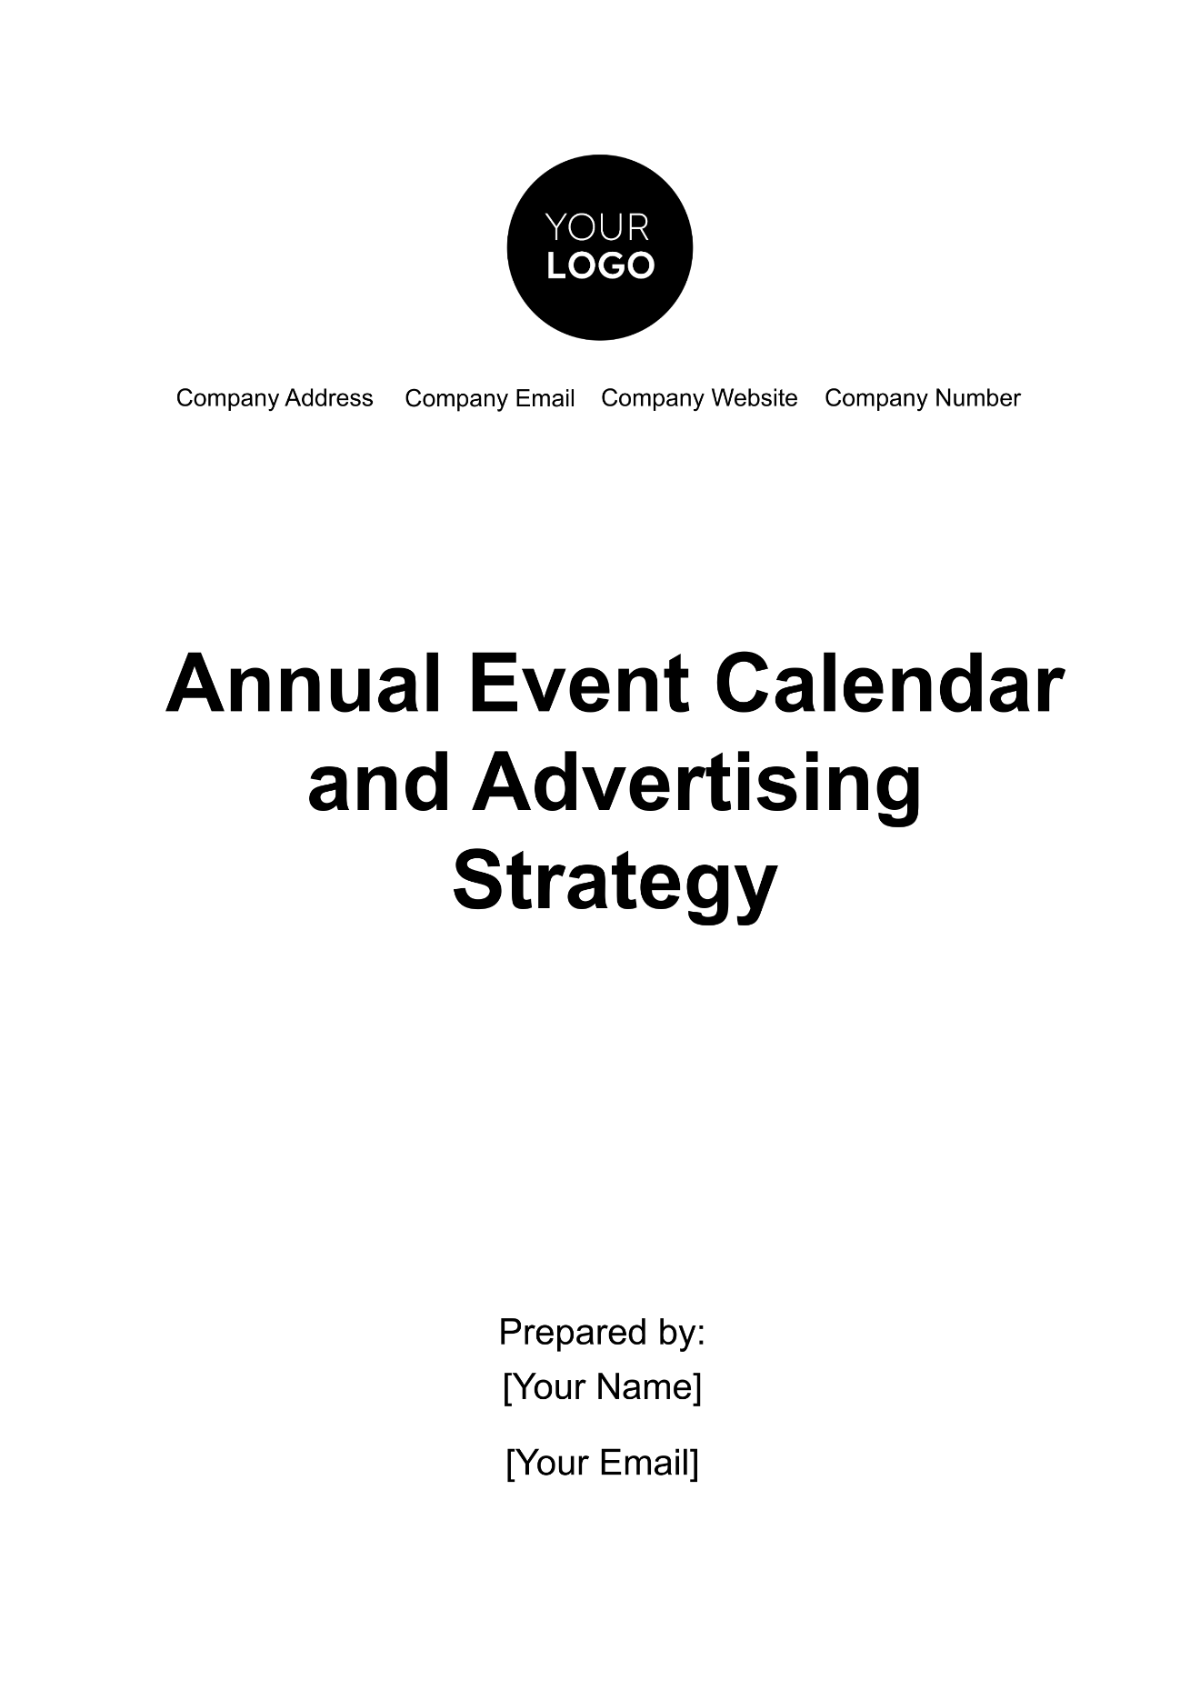 Annual Event Calendar and Advertising Strategy Template